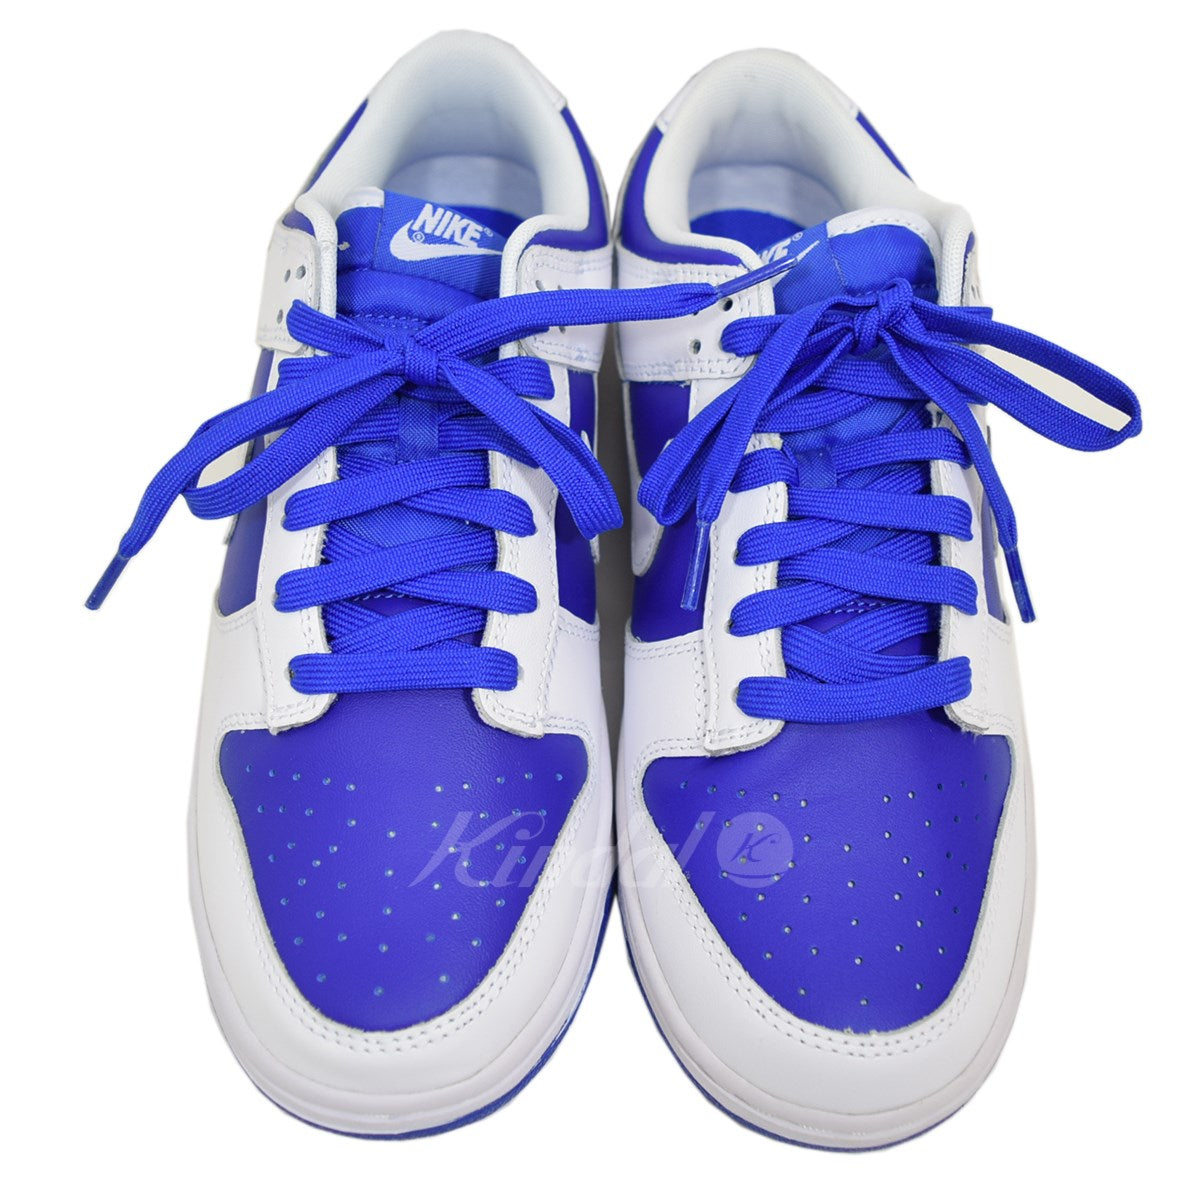 NIKE(ナイキ) Dunk Low Racer Blue and White ダンクロー DD1391 401